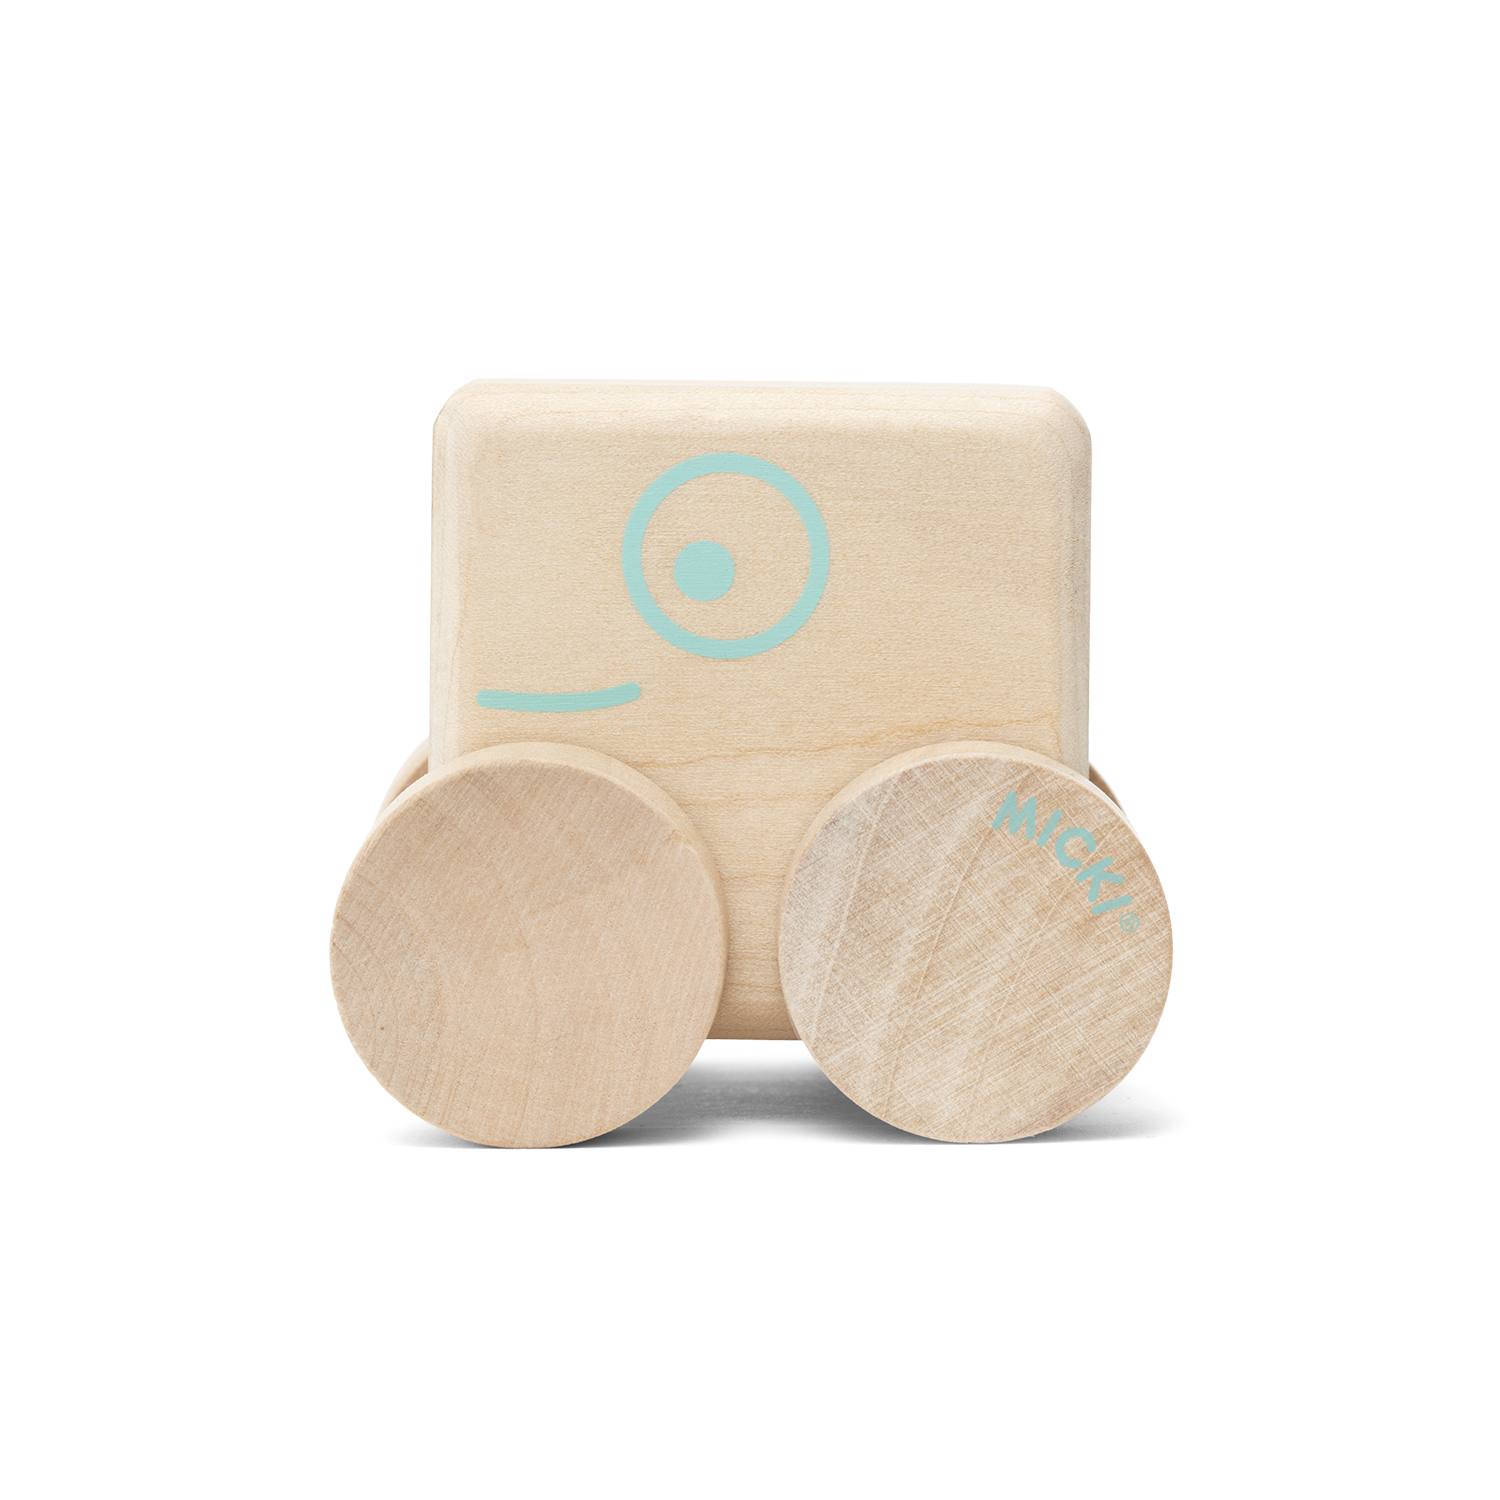 Wooden toys micki toy car square natural wood